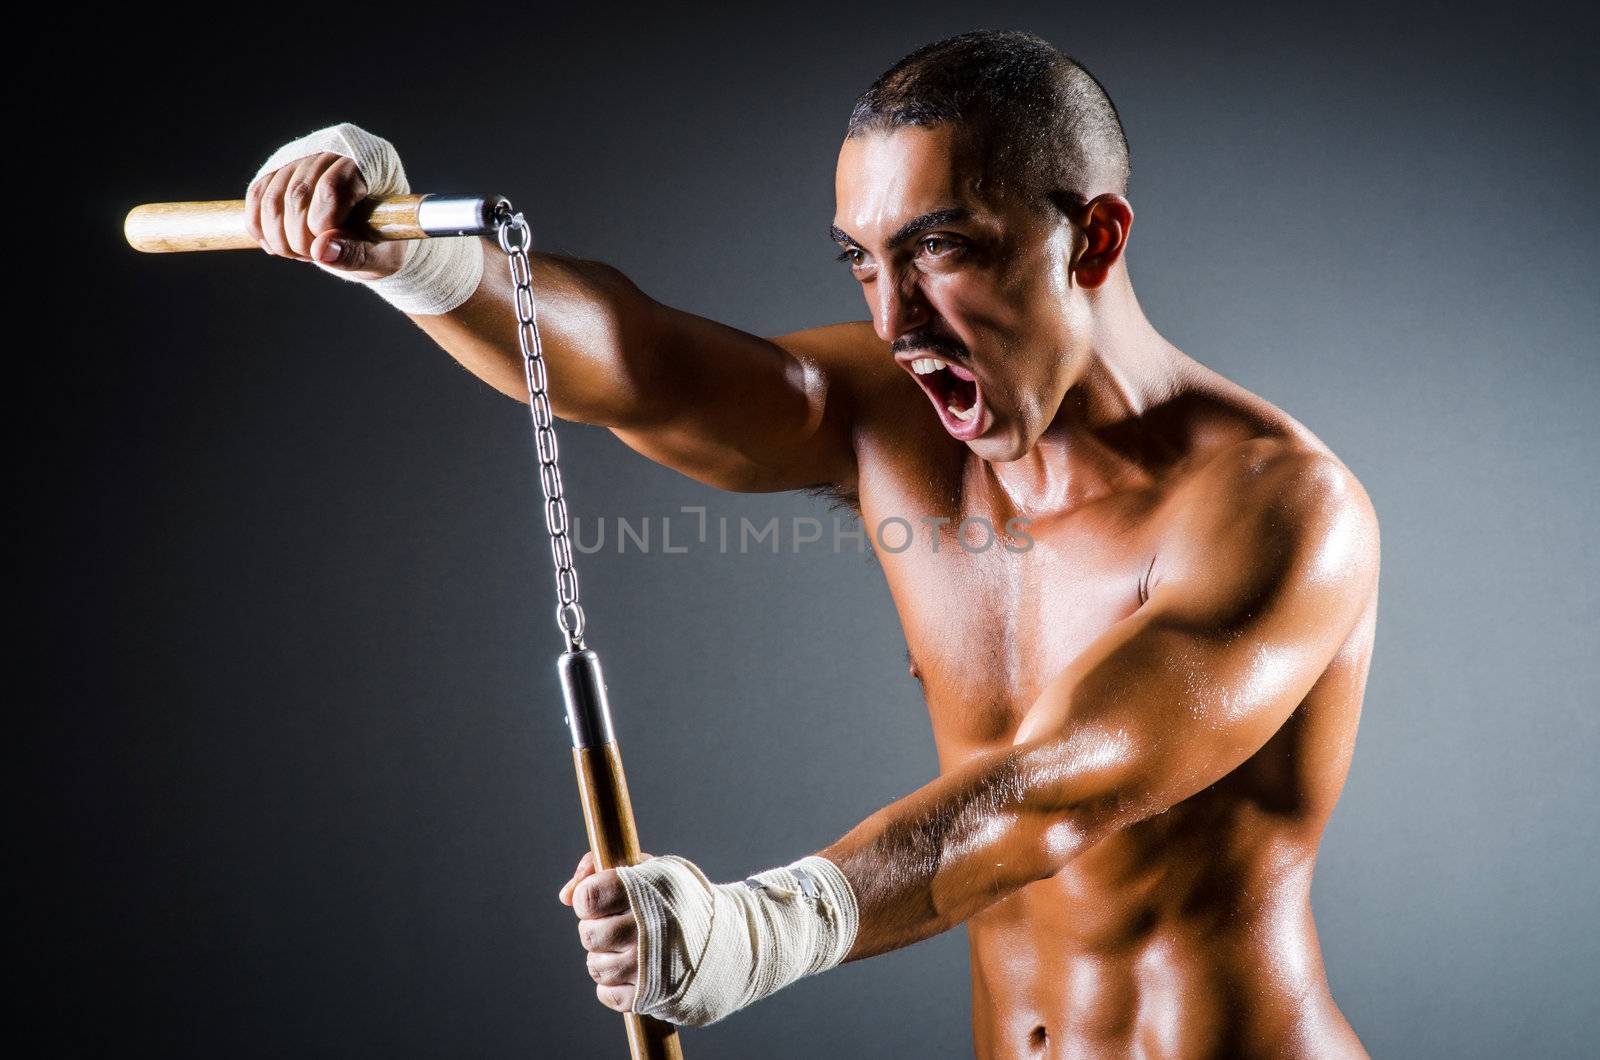 Strong man with nunchaku by Elnur